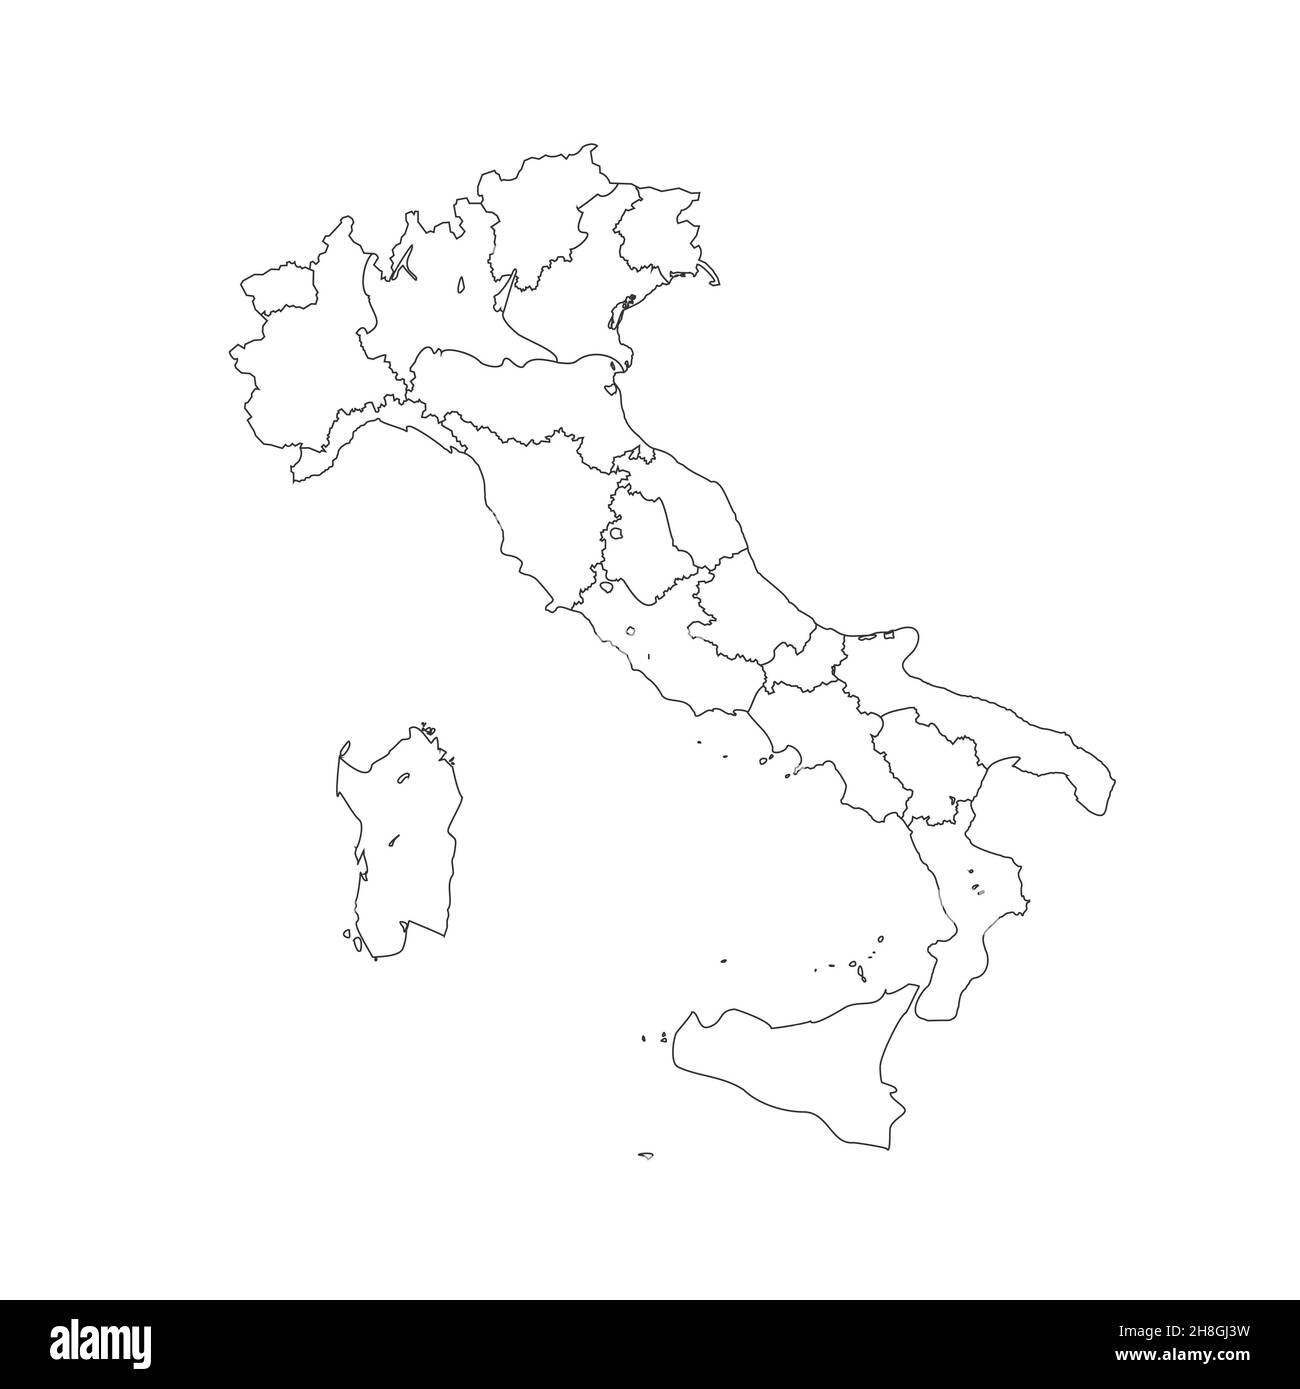 Simple outline Map Of Italy Isolated On White Background. Stock Photo